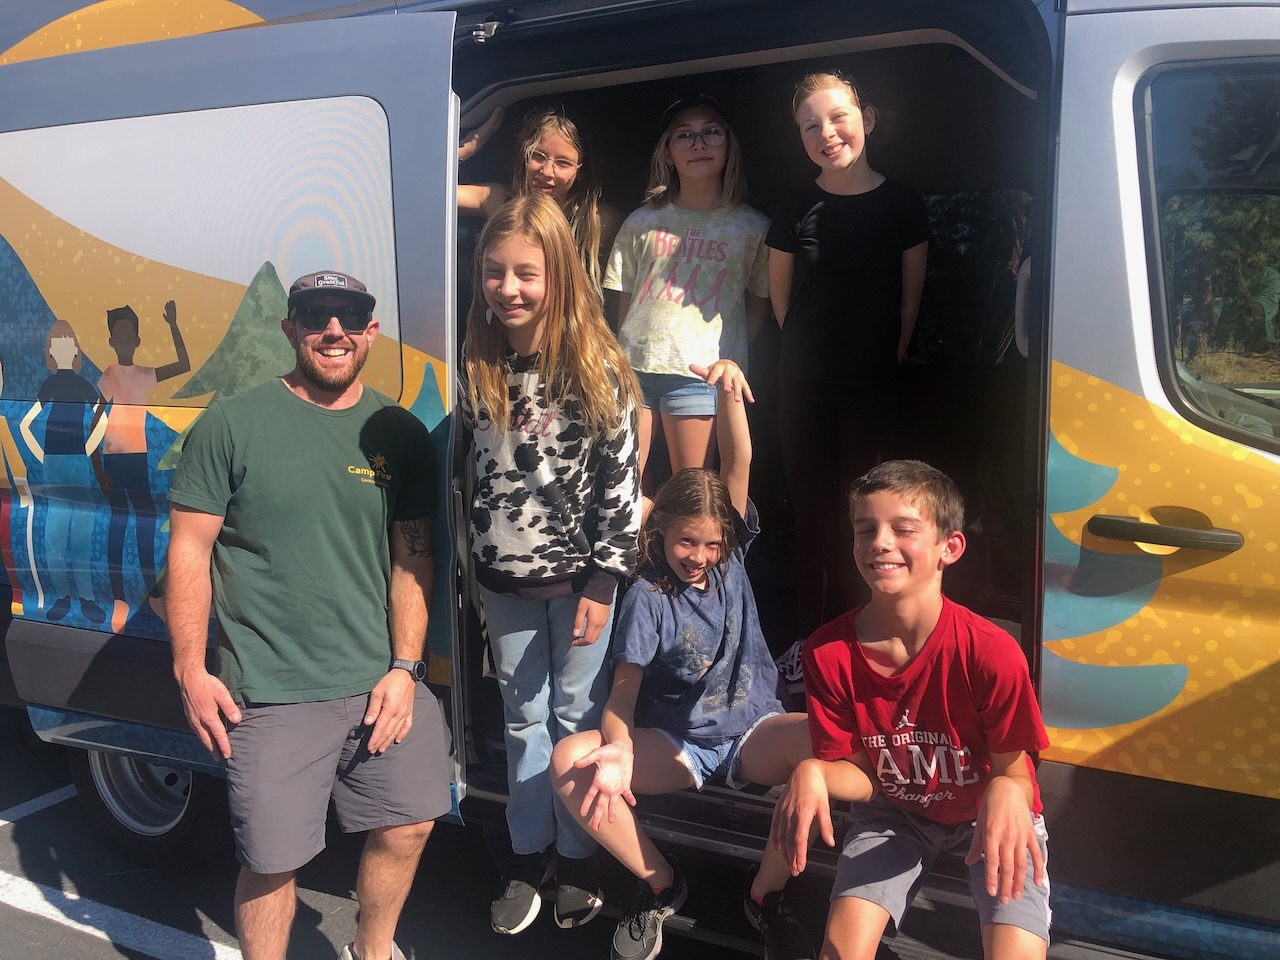 Camp Fire counselor James and 6 campers pose with Sparky the Van